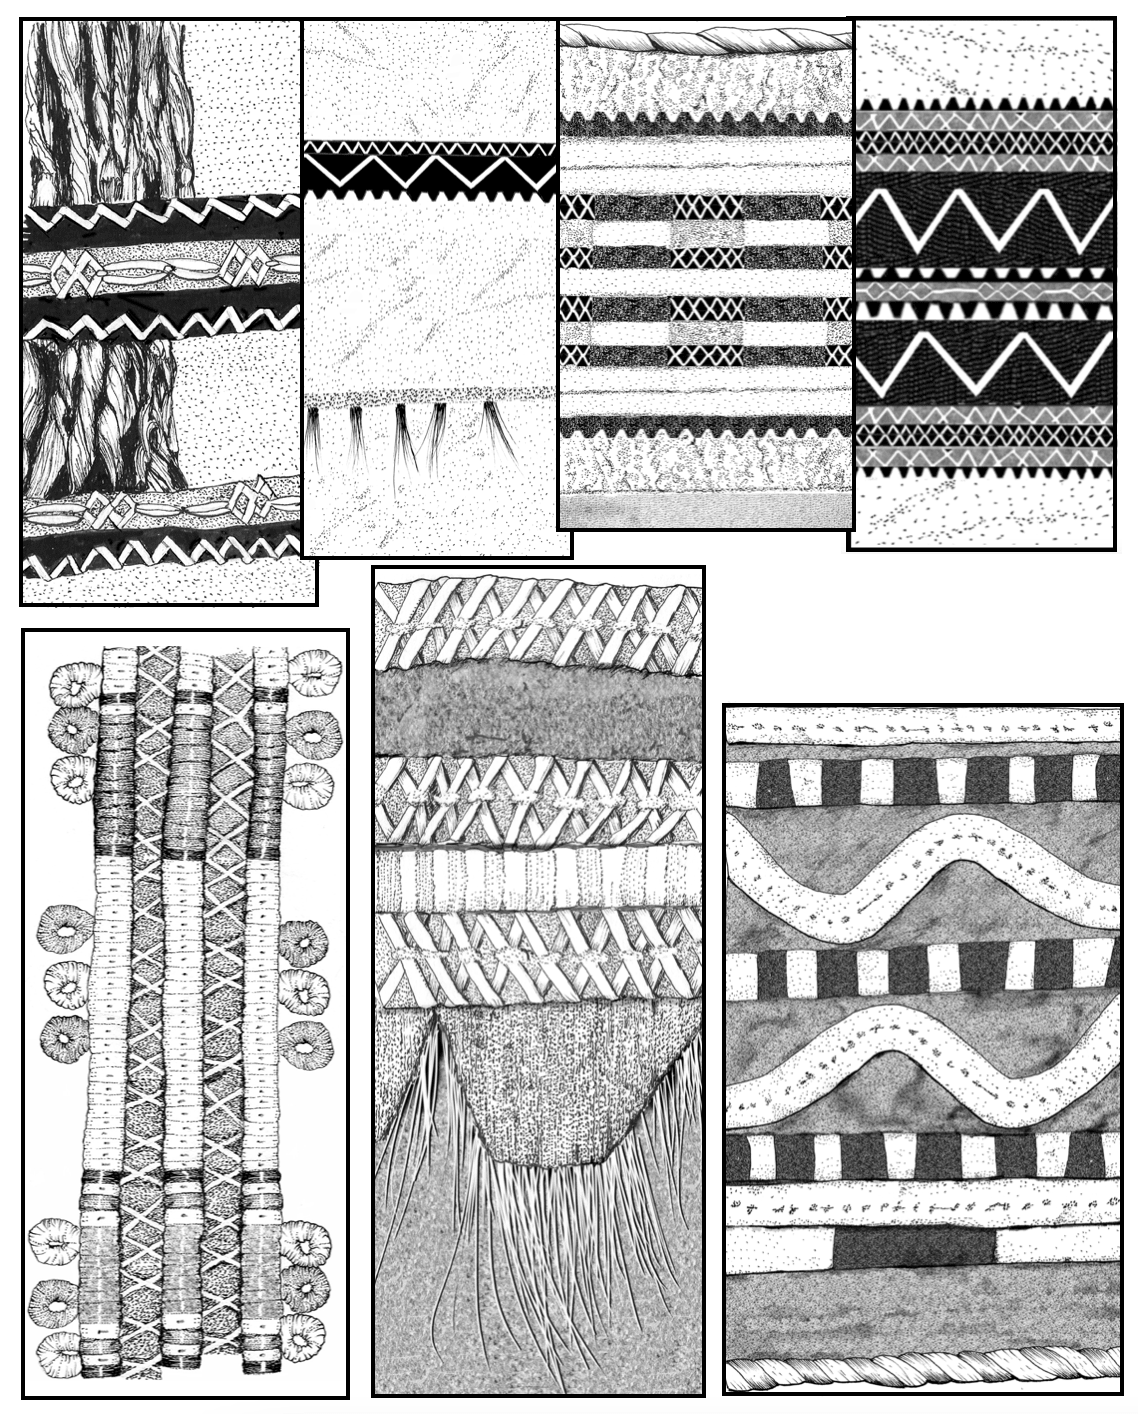 Weavers incorporated cotton thread, hair, and sinew into intricate patterns.